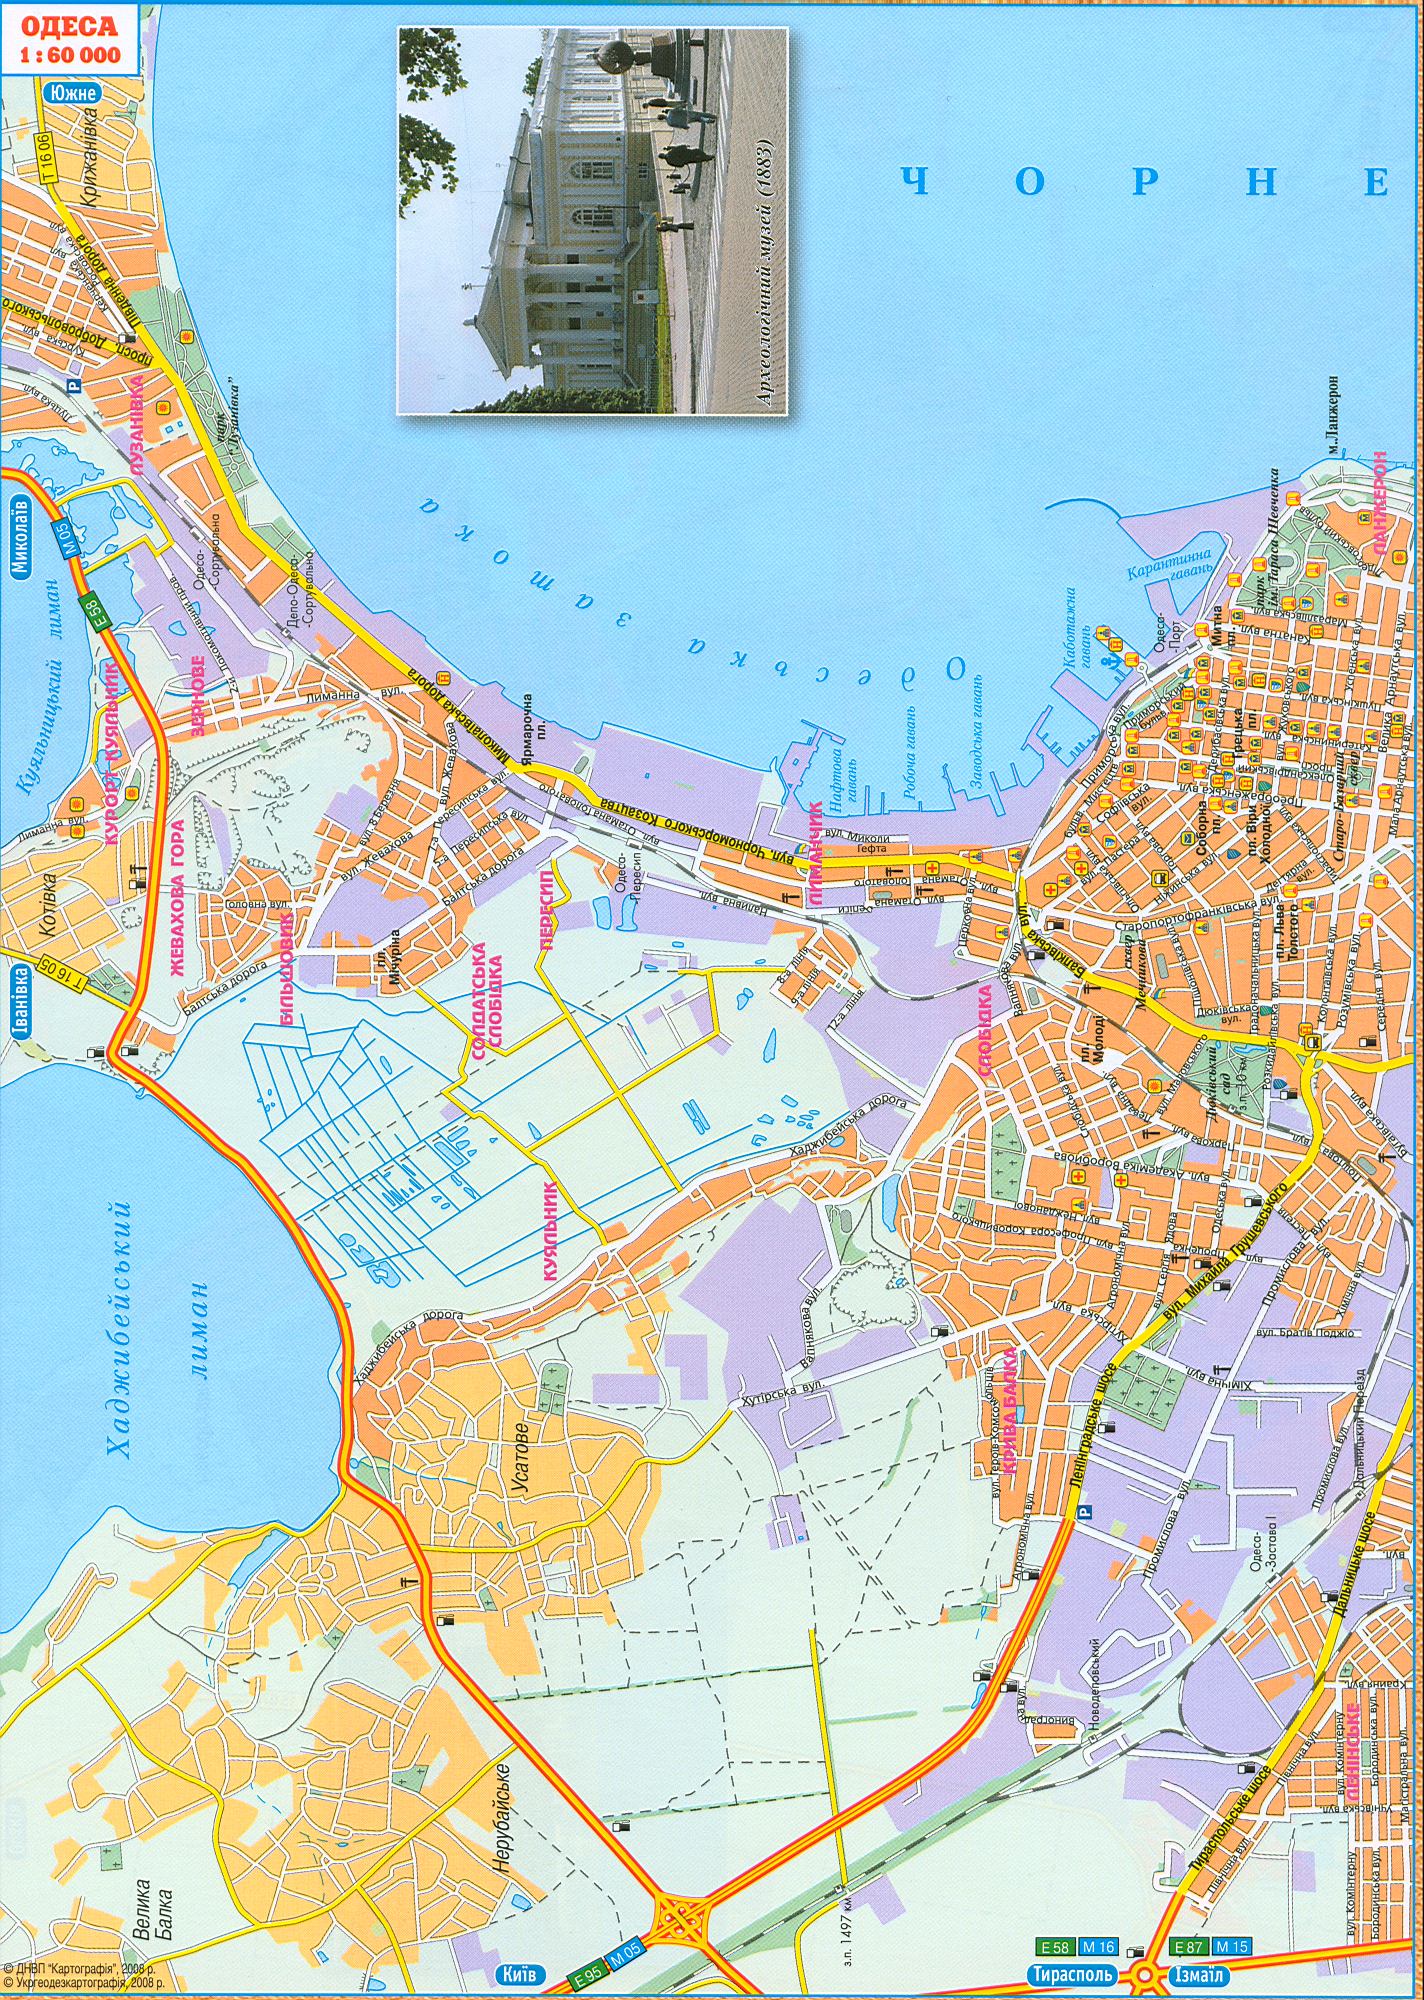 Map of Odessa updated in 2008, the main transport highways of Odessa, scale 1cm: 600m. Download for free